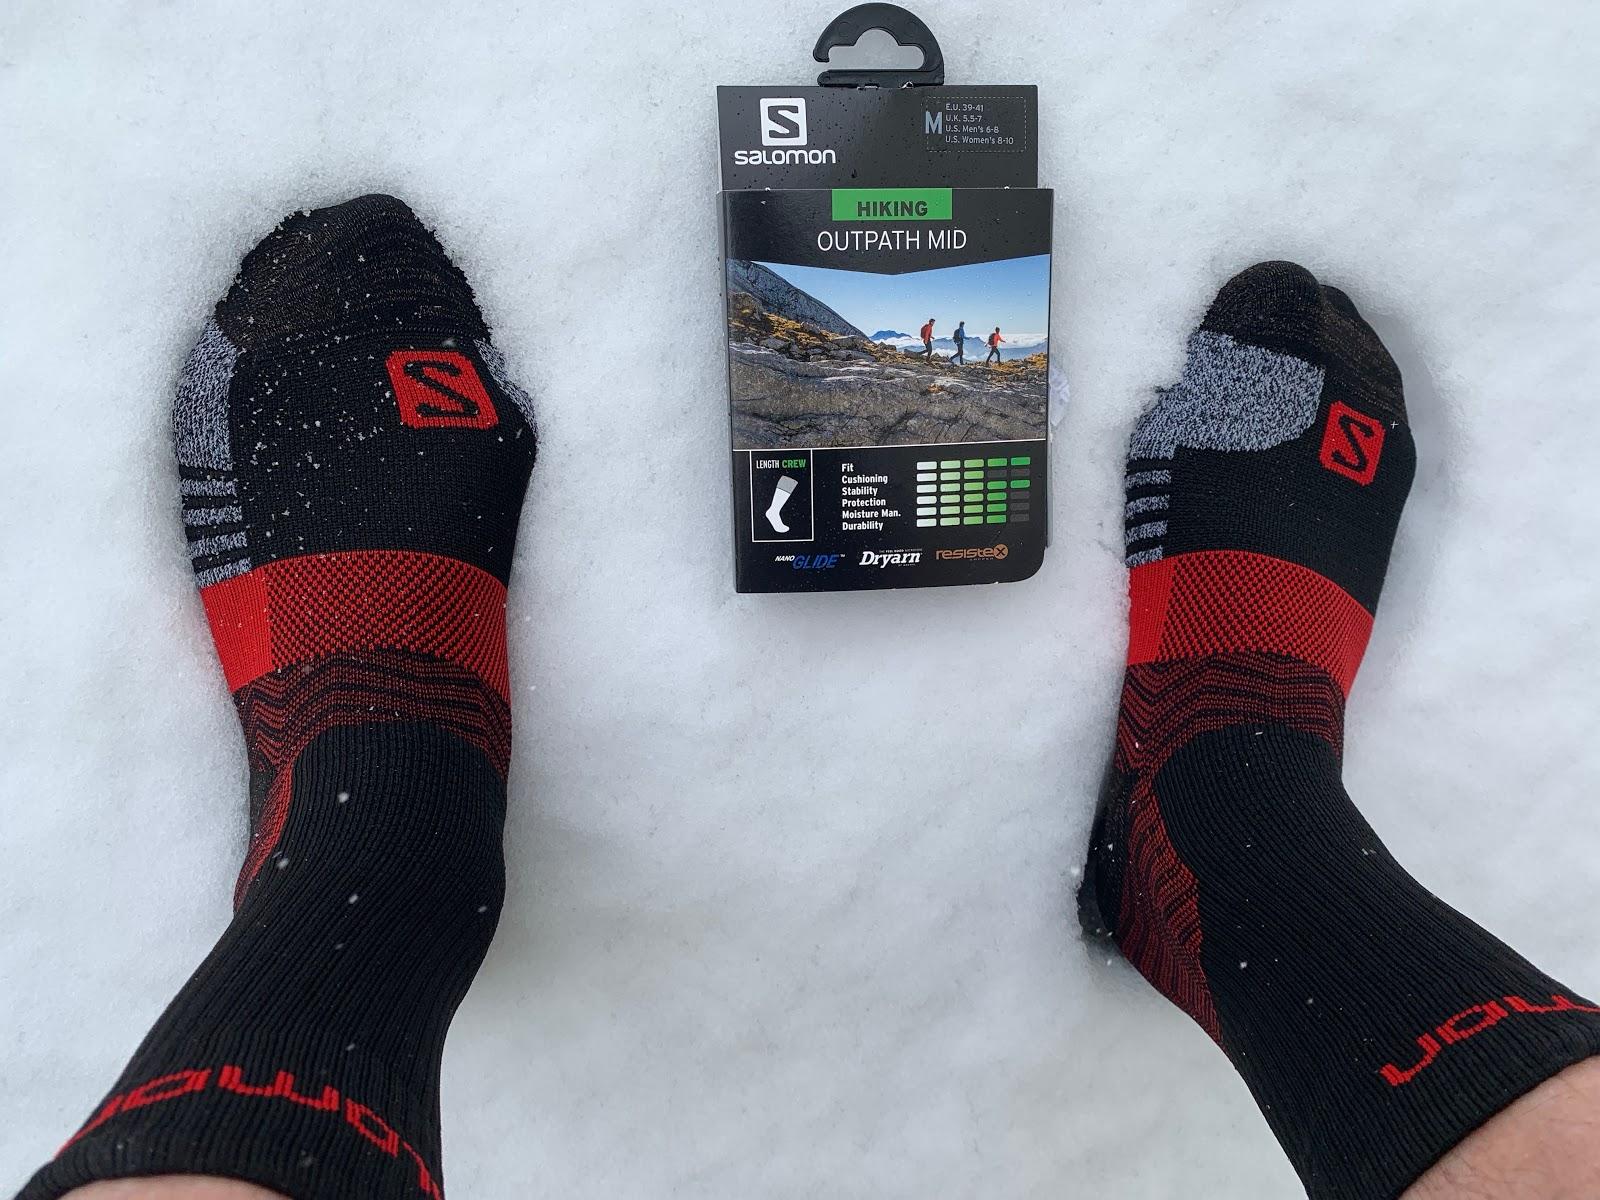 Road Trail Run: Socks Review: Introducing a wide range of technically advanced socks for running, hiking, and skiing,